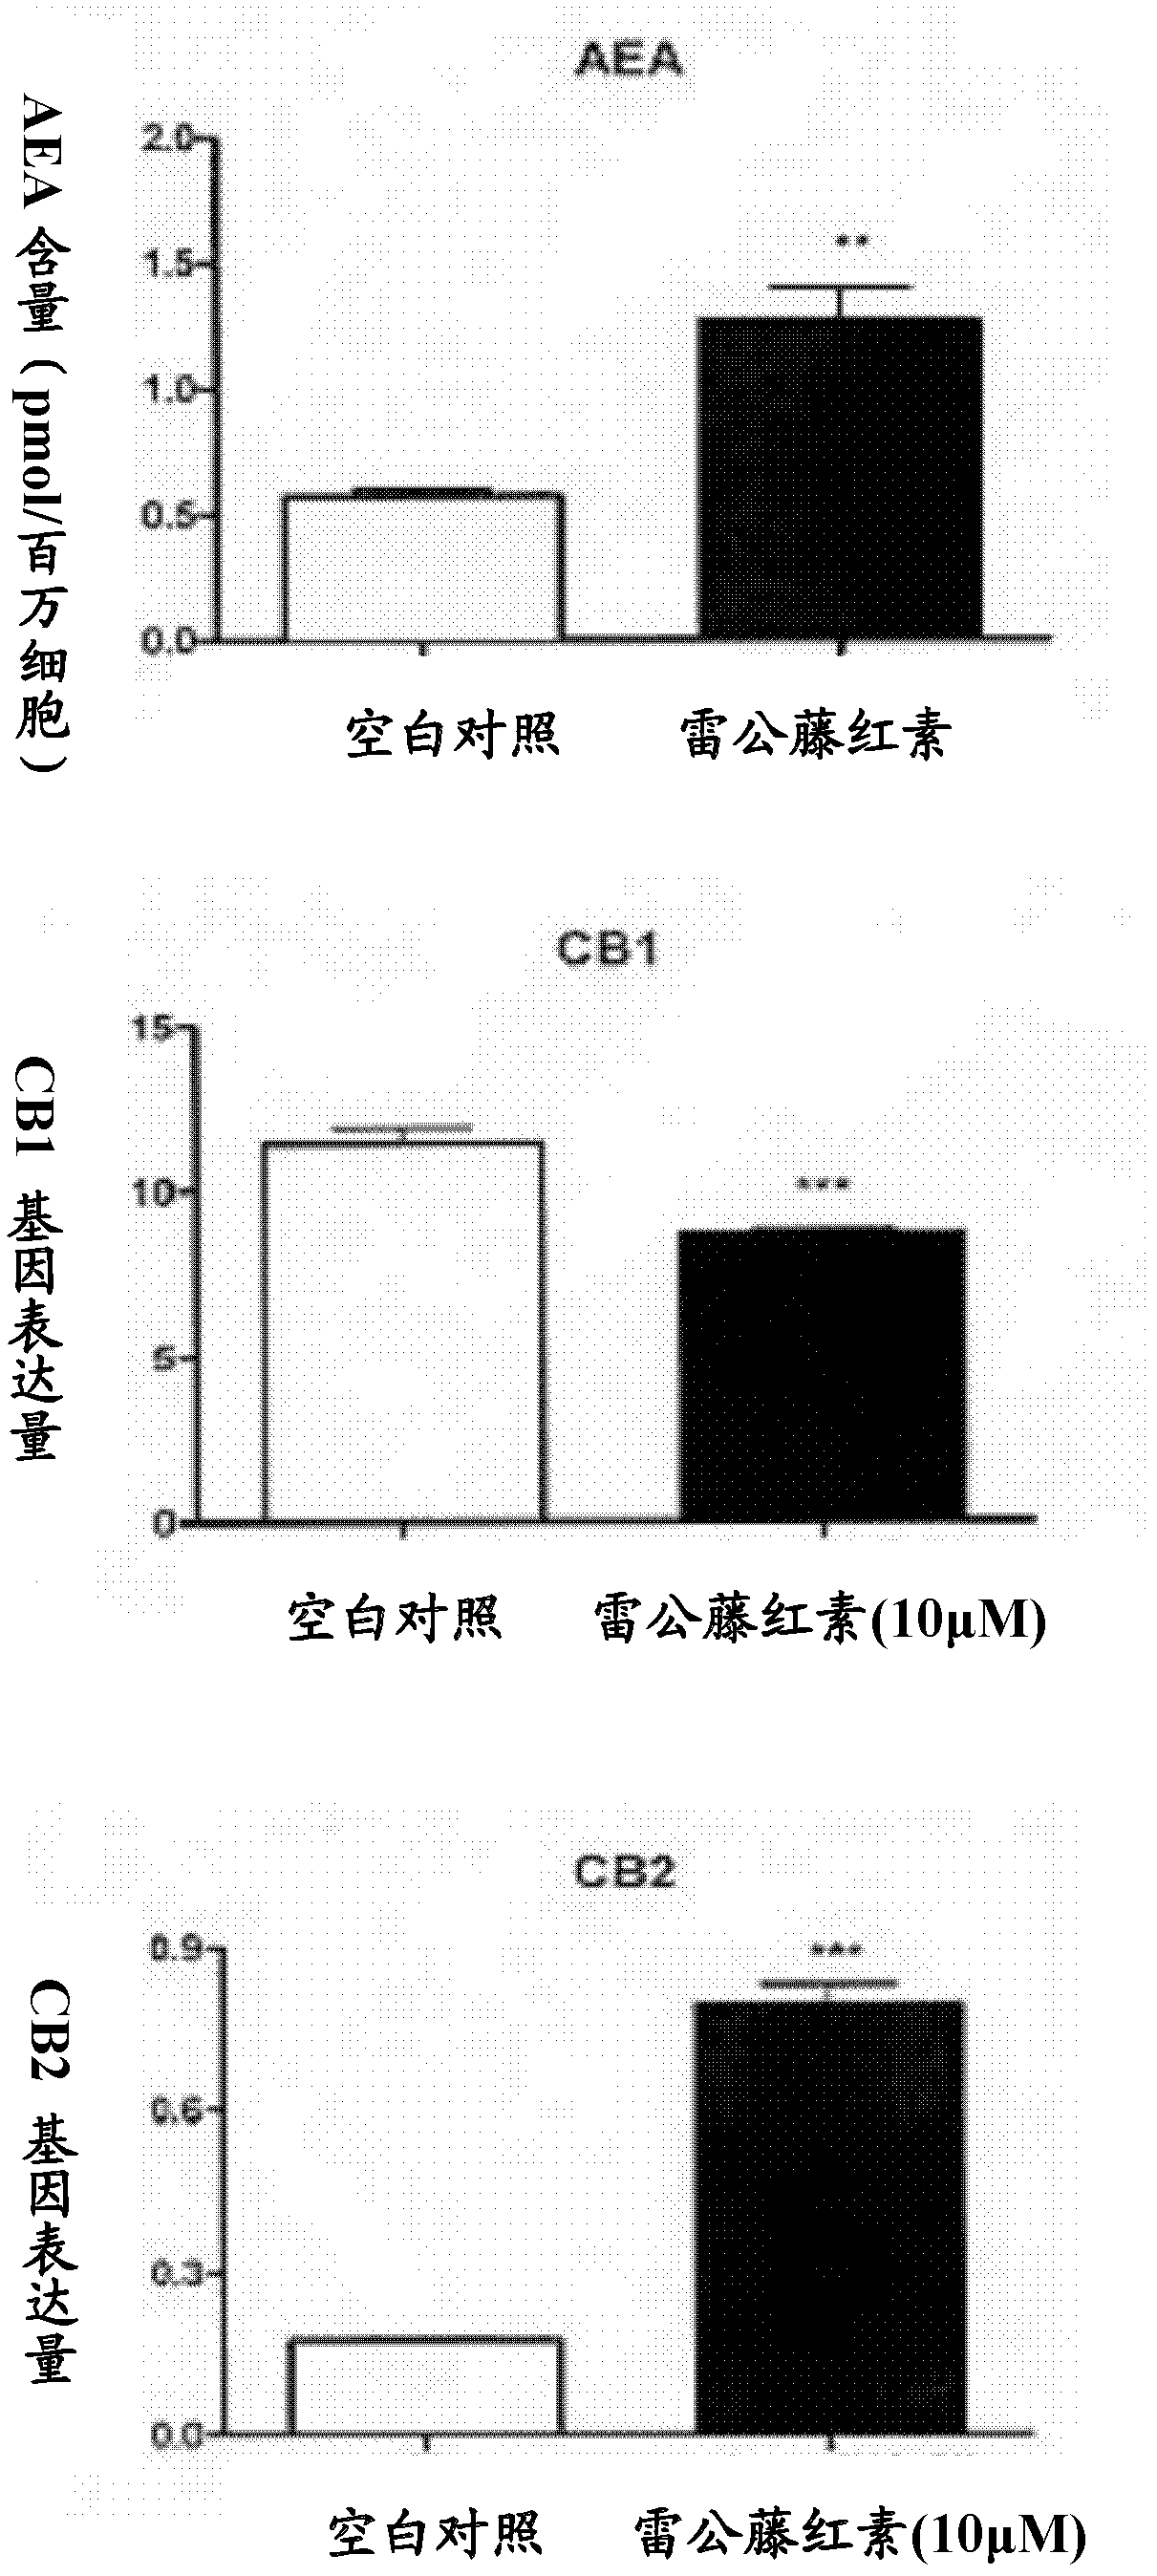 Application and preparation method of tripterine